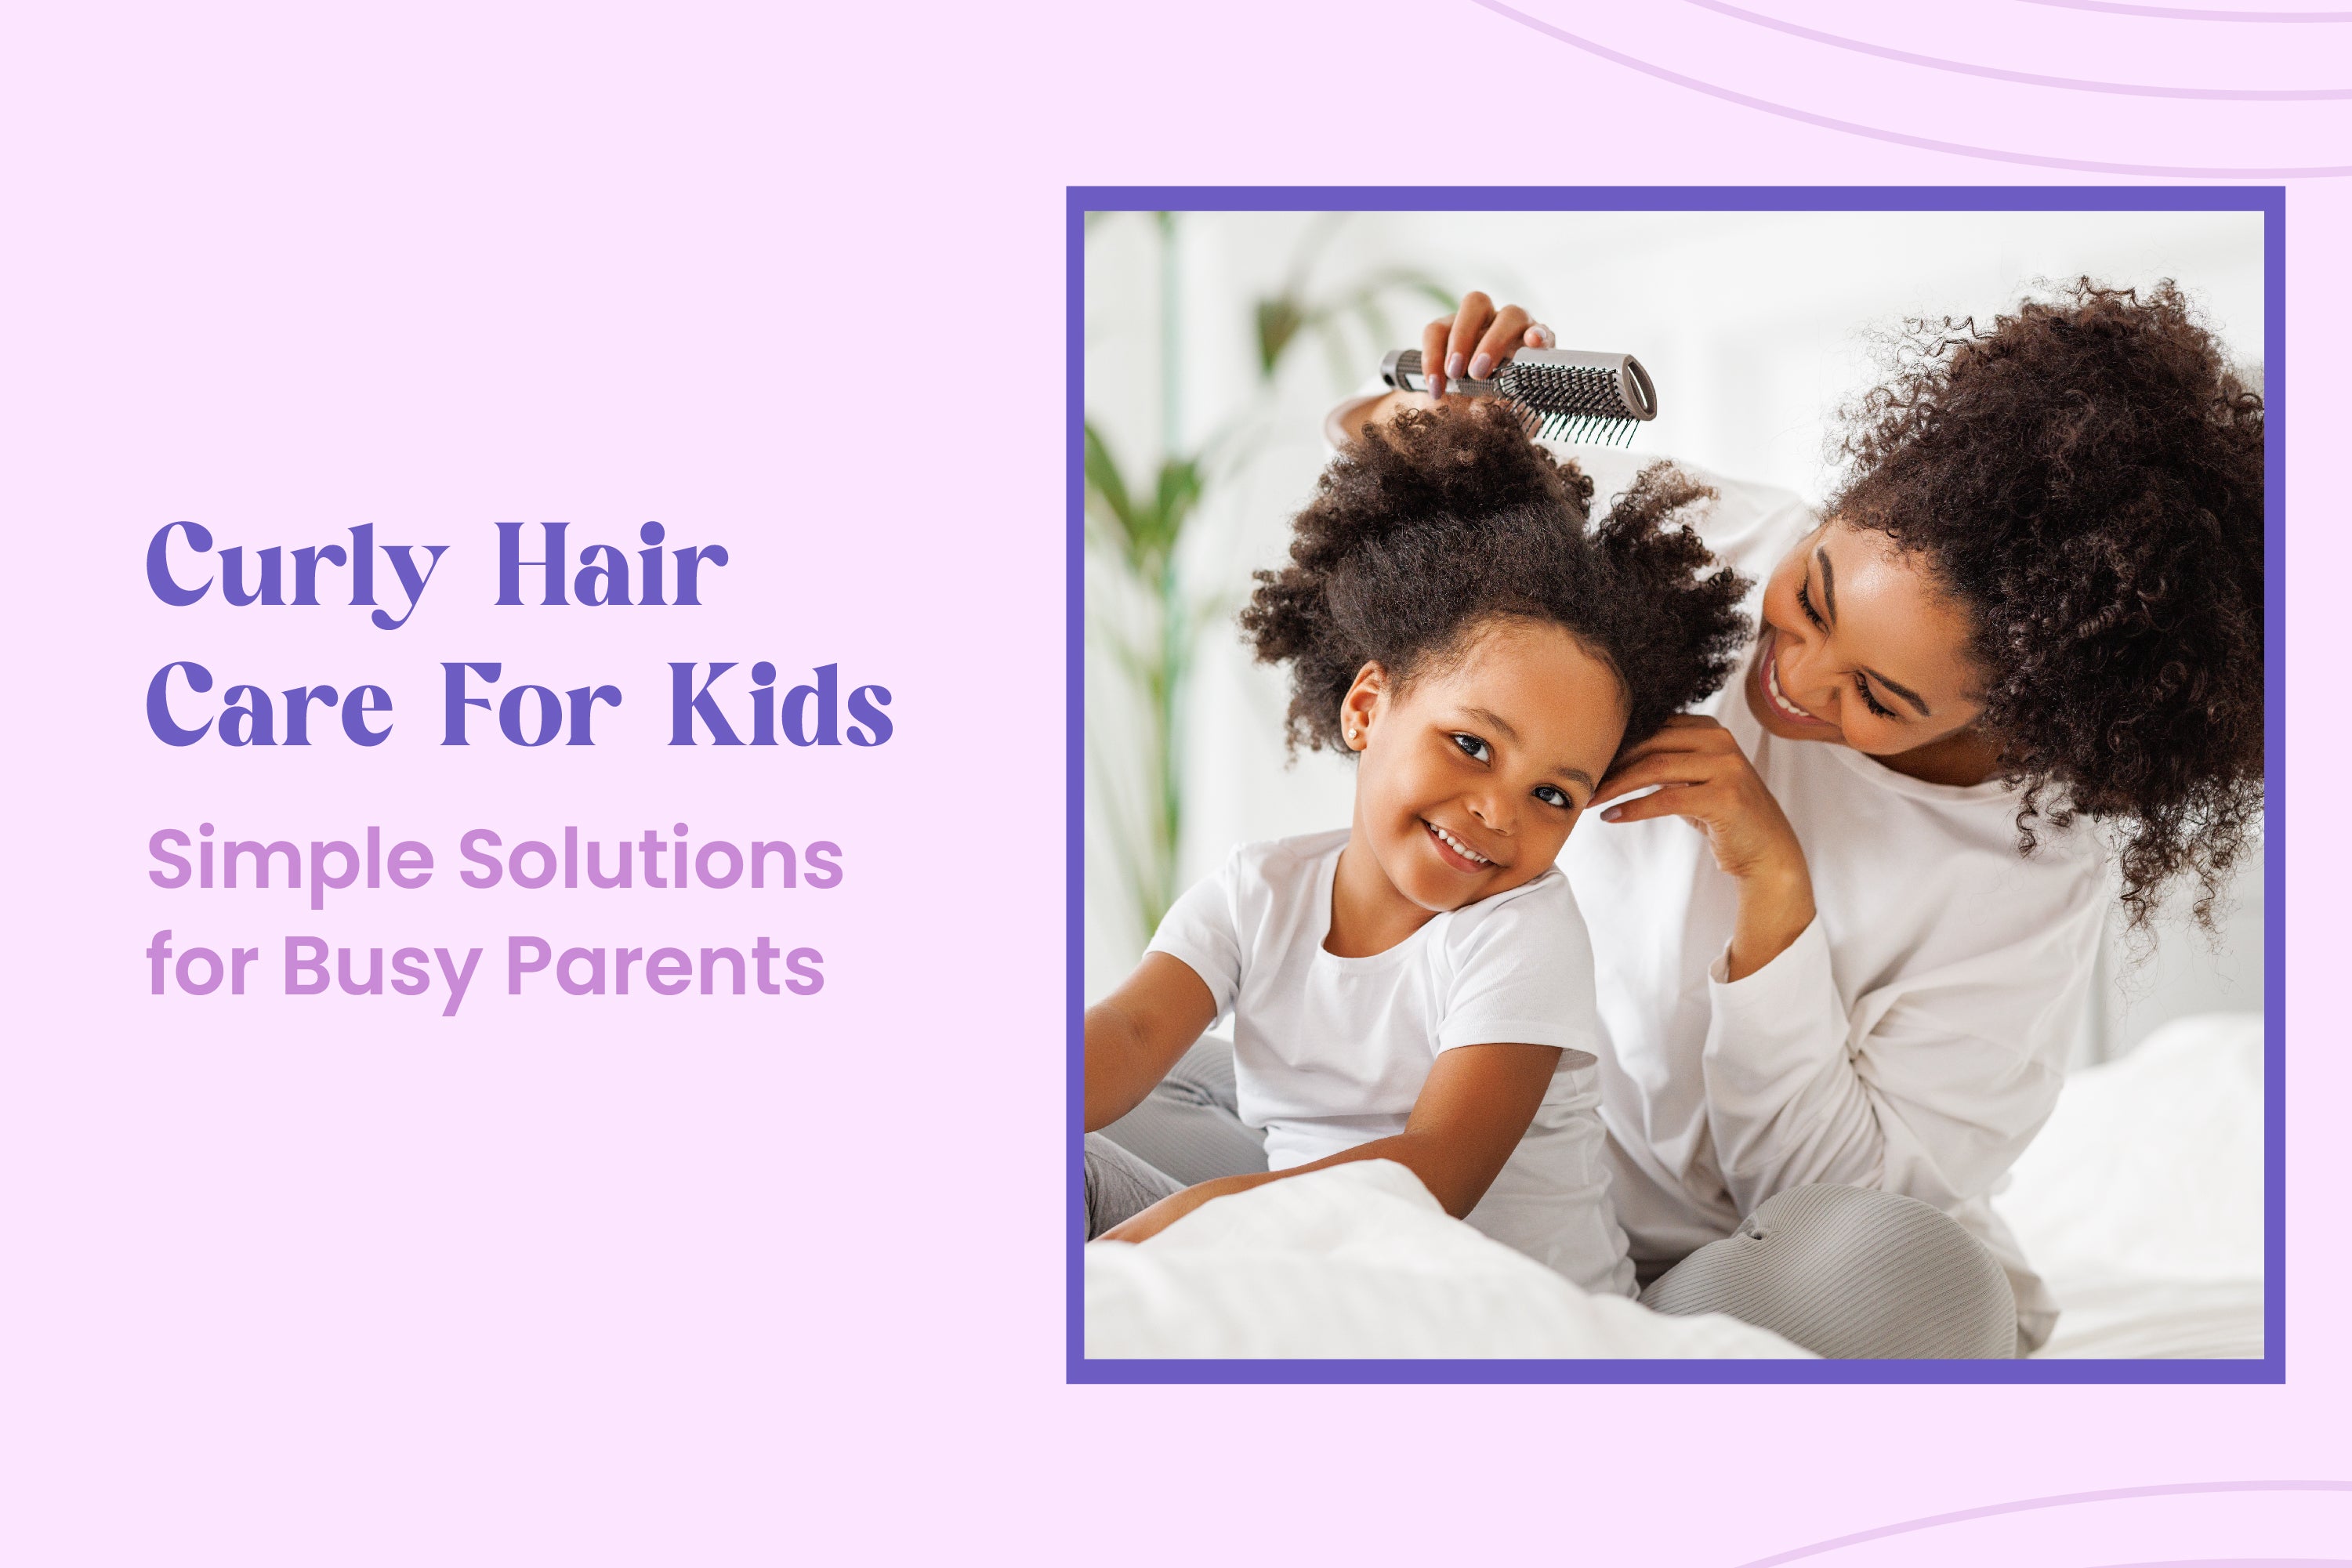 Curly Hair Care for Kids - Simple Solutions for Busy Parents